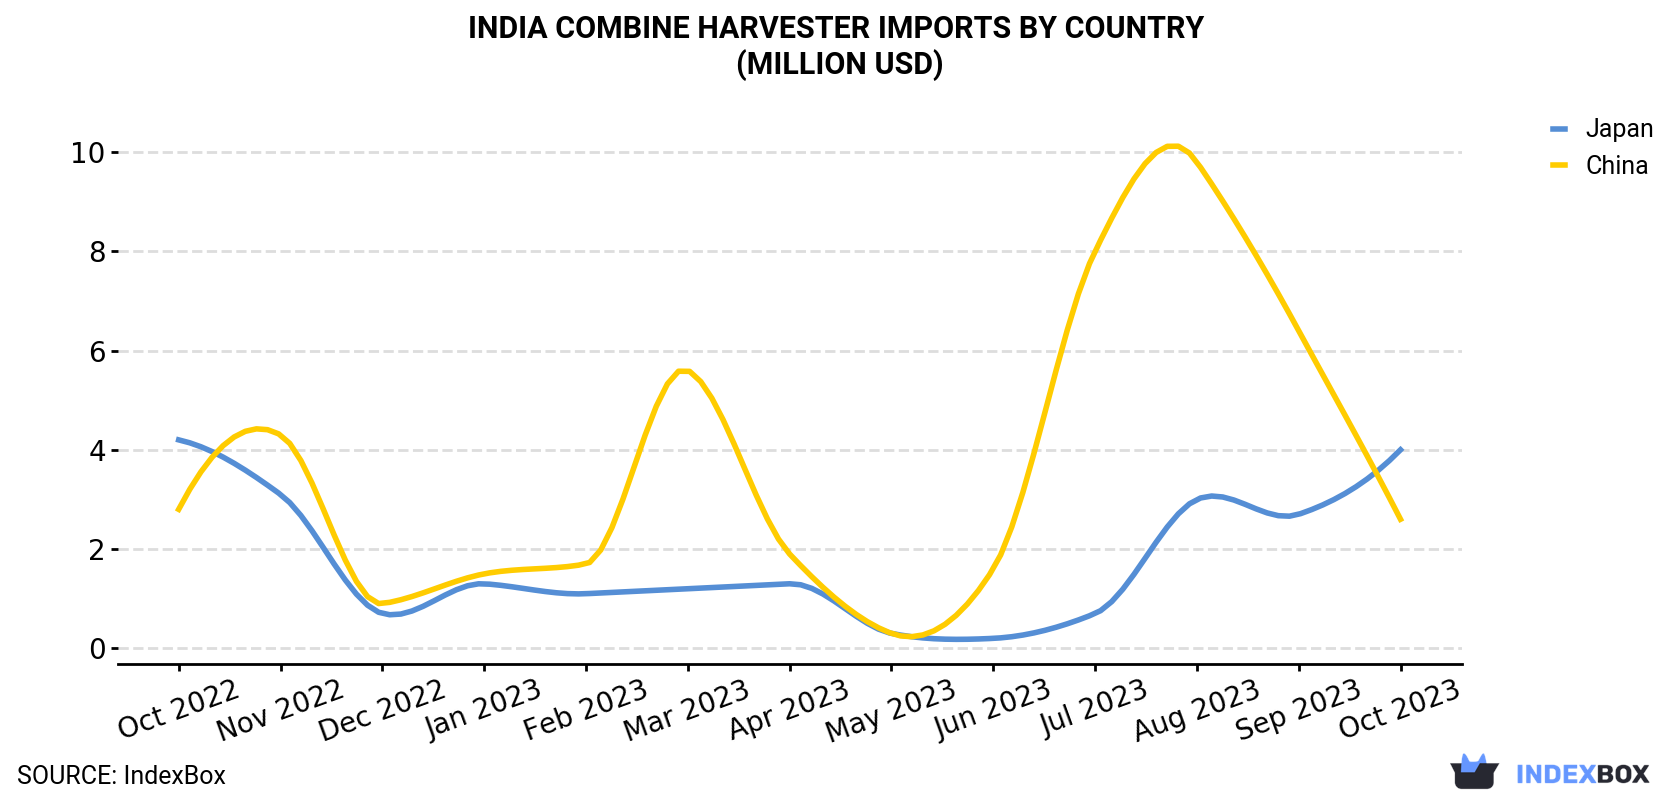 India Combine Harvester Imports By Country (Million USD)